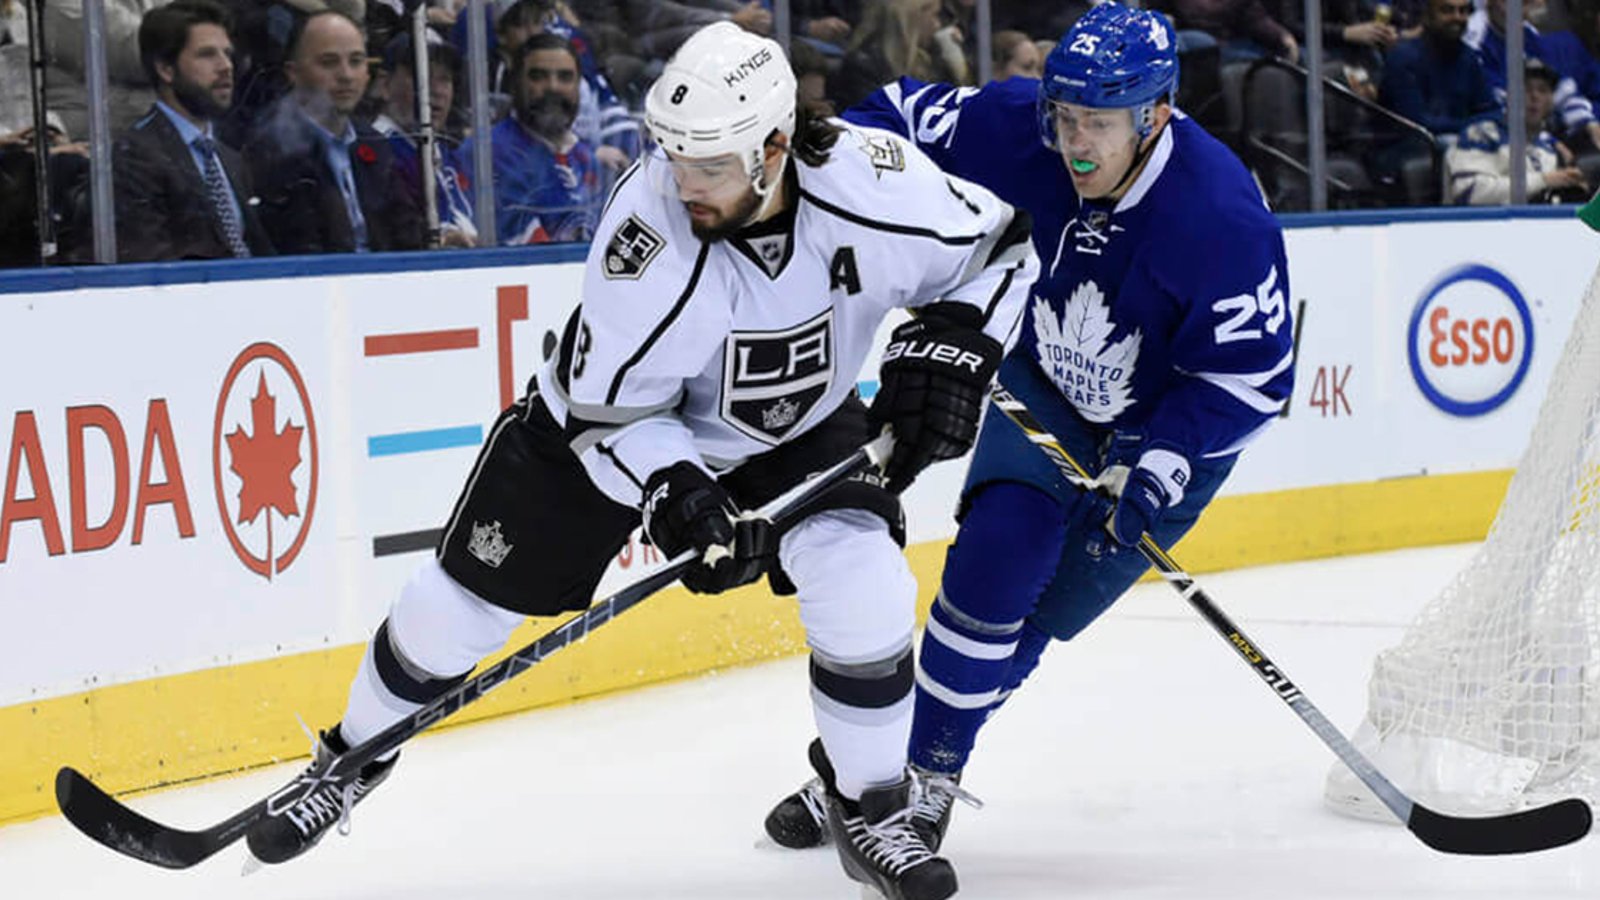 Rumor Report: Doughty makes surprising comments about the Leafs and free-agency